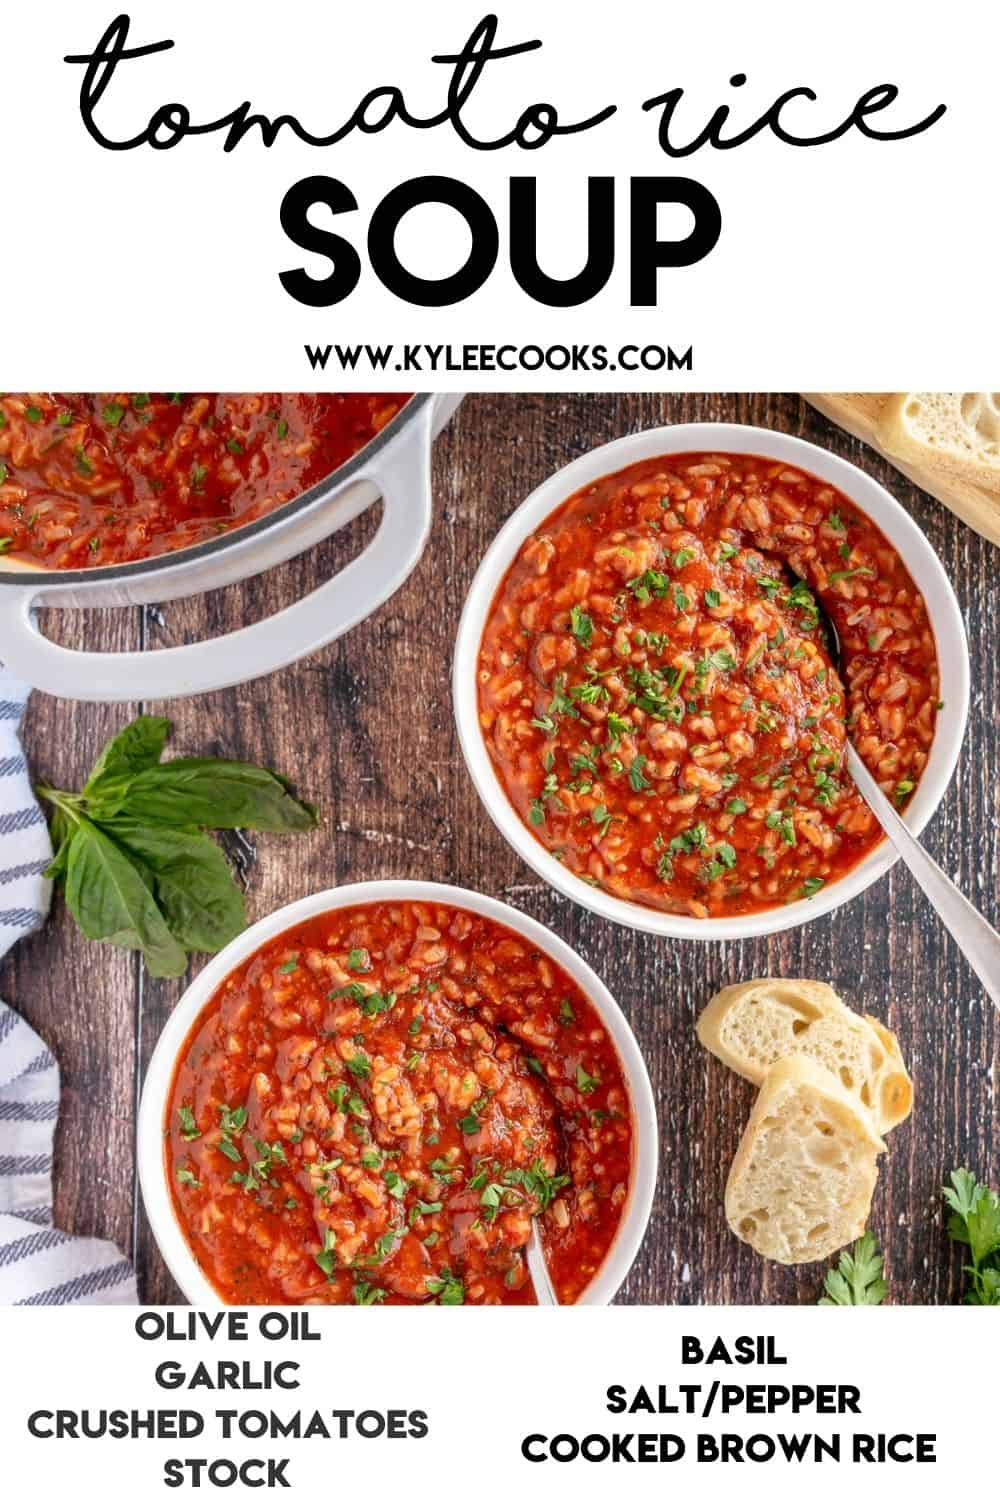 tomato rice soup with recipe title overlaid in text.